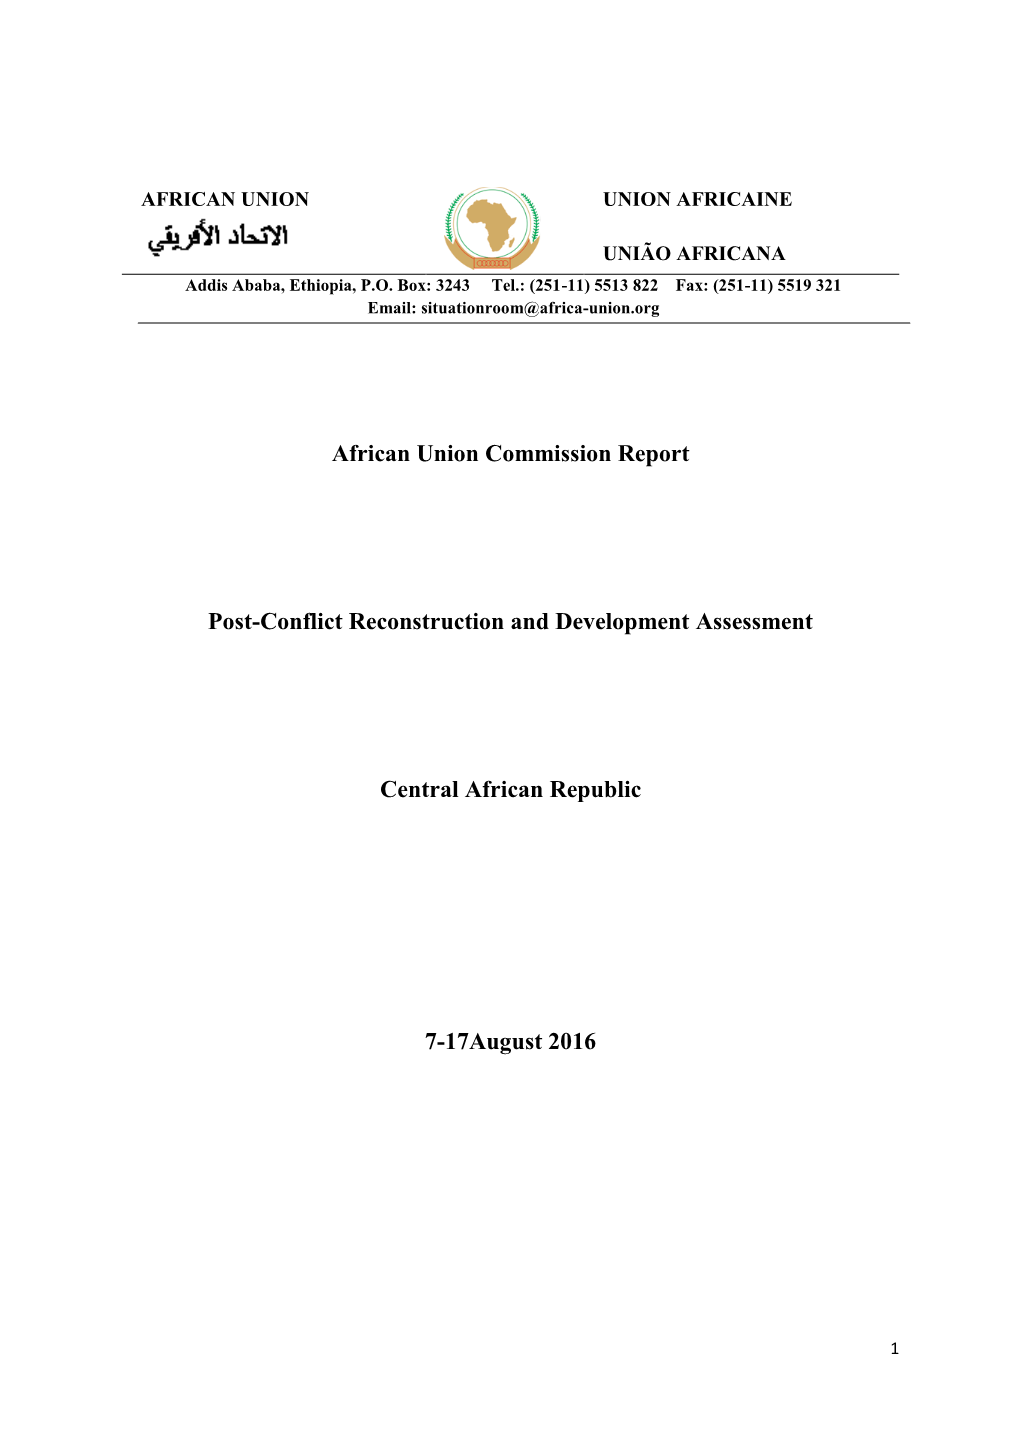 African Union Commission Report Post-Conflict Reconstruction And